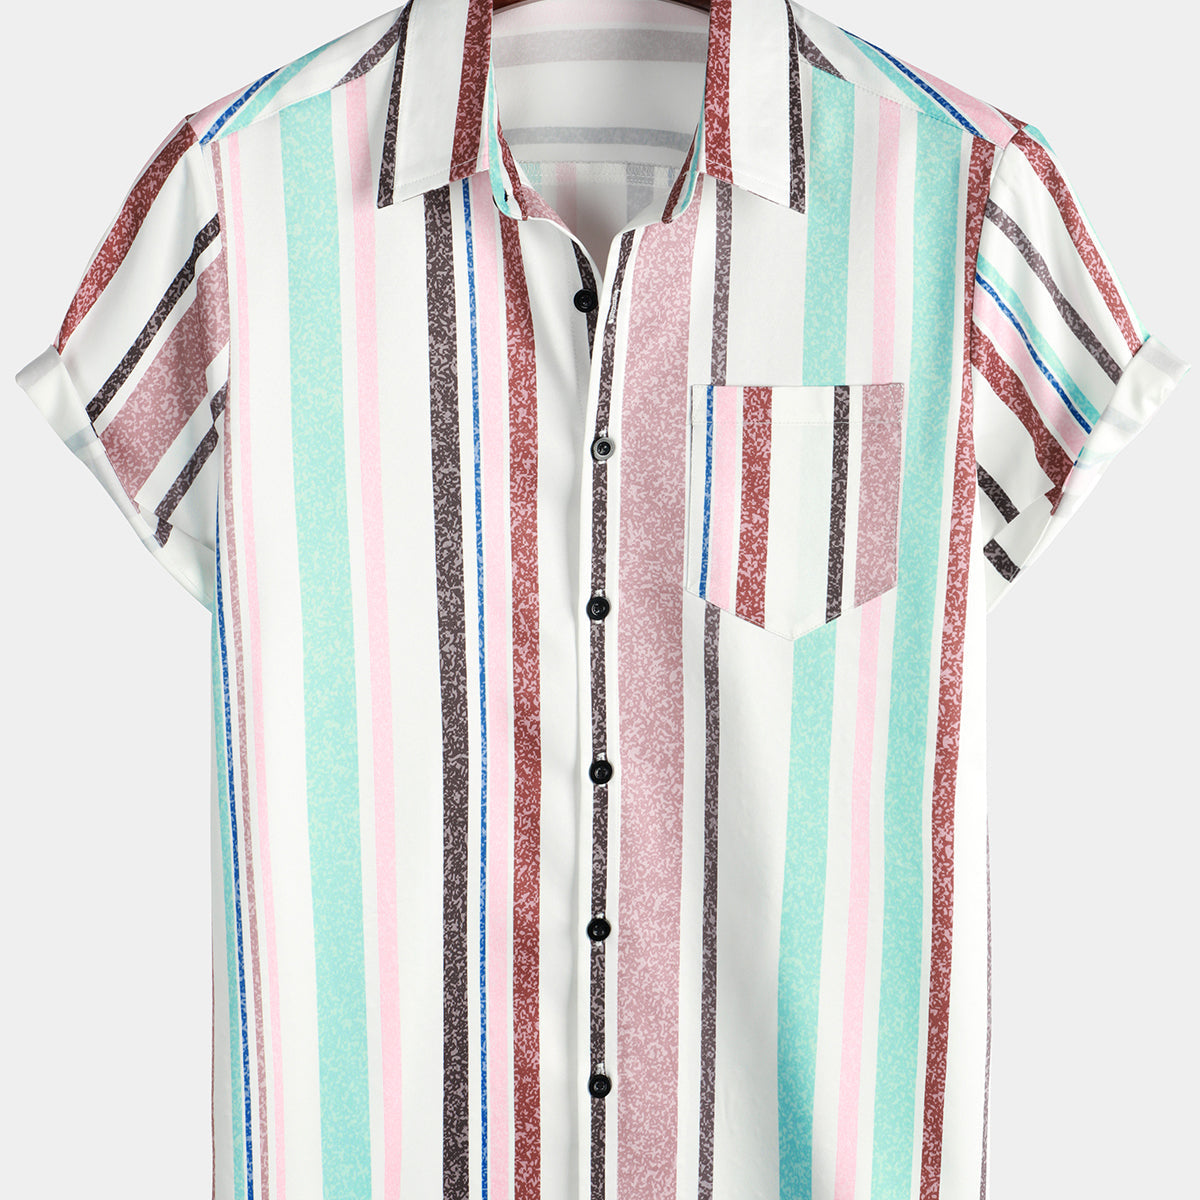 Men's Colorful Button Up Vertical Rainbow Striped Short Sleeve Pocket Shirt